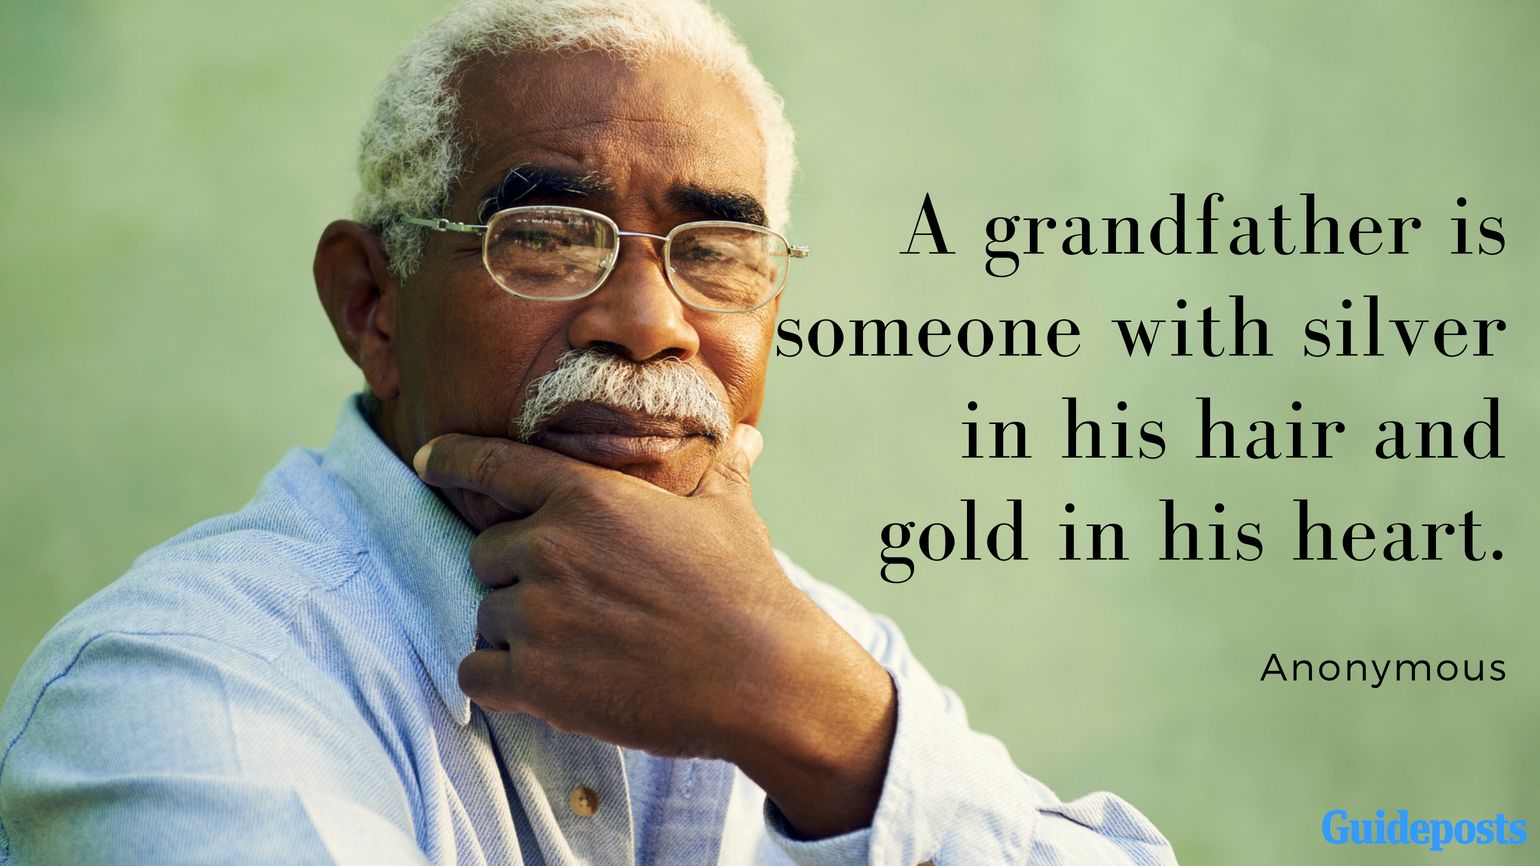 A grandfather is someone with silver in his hair and gold in his heart. —Anonymous